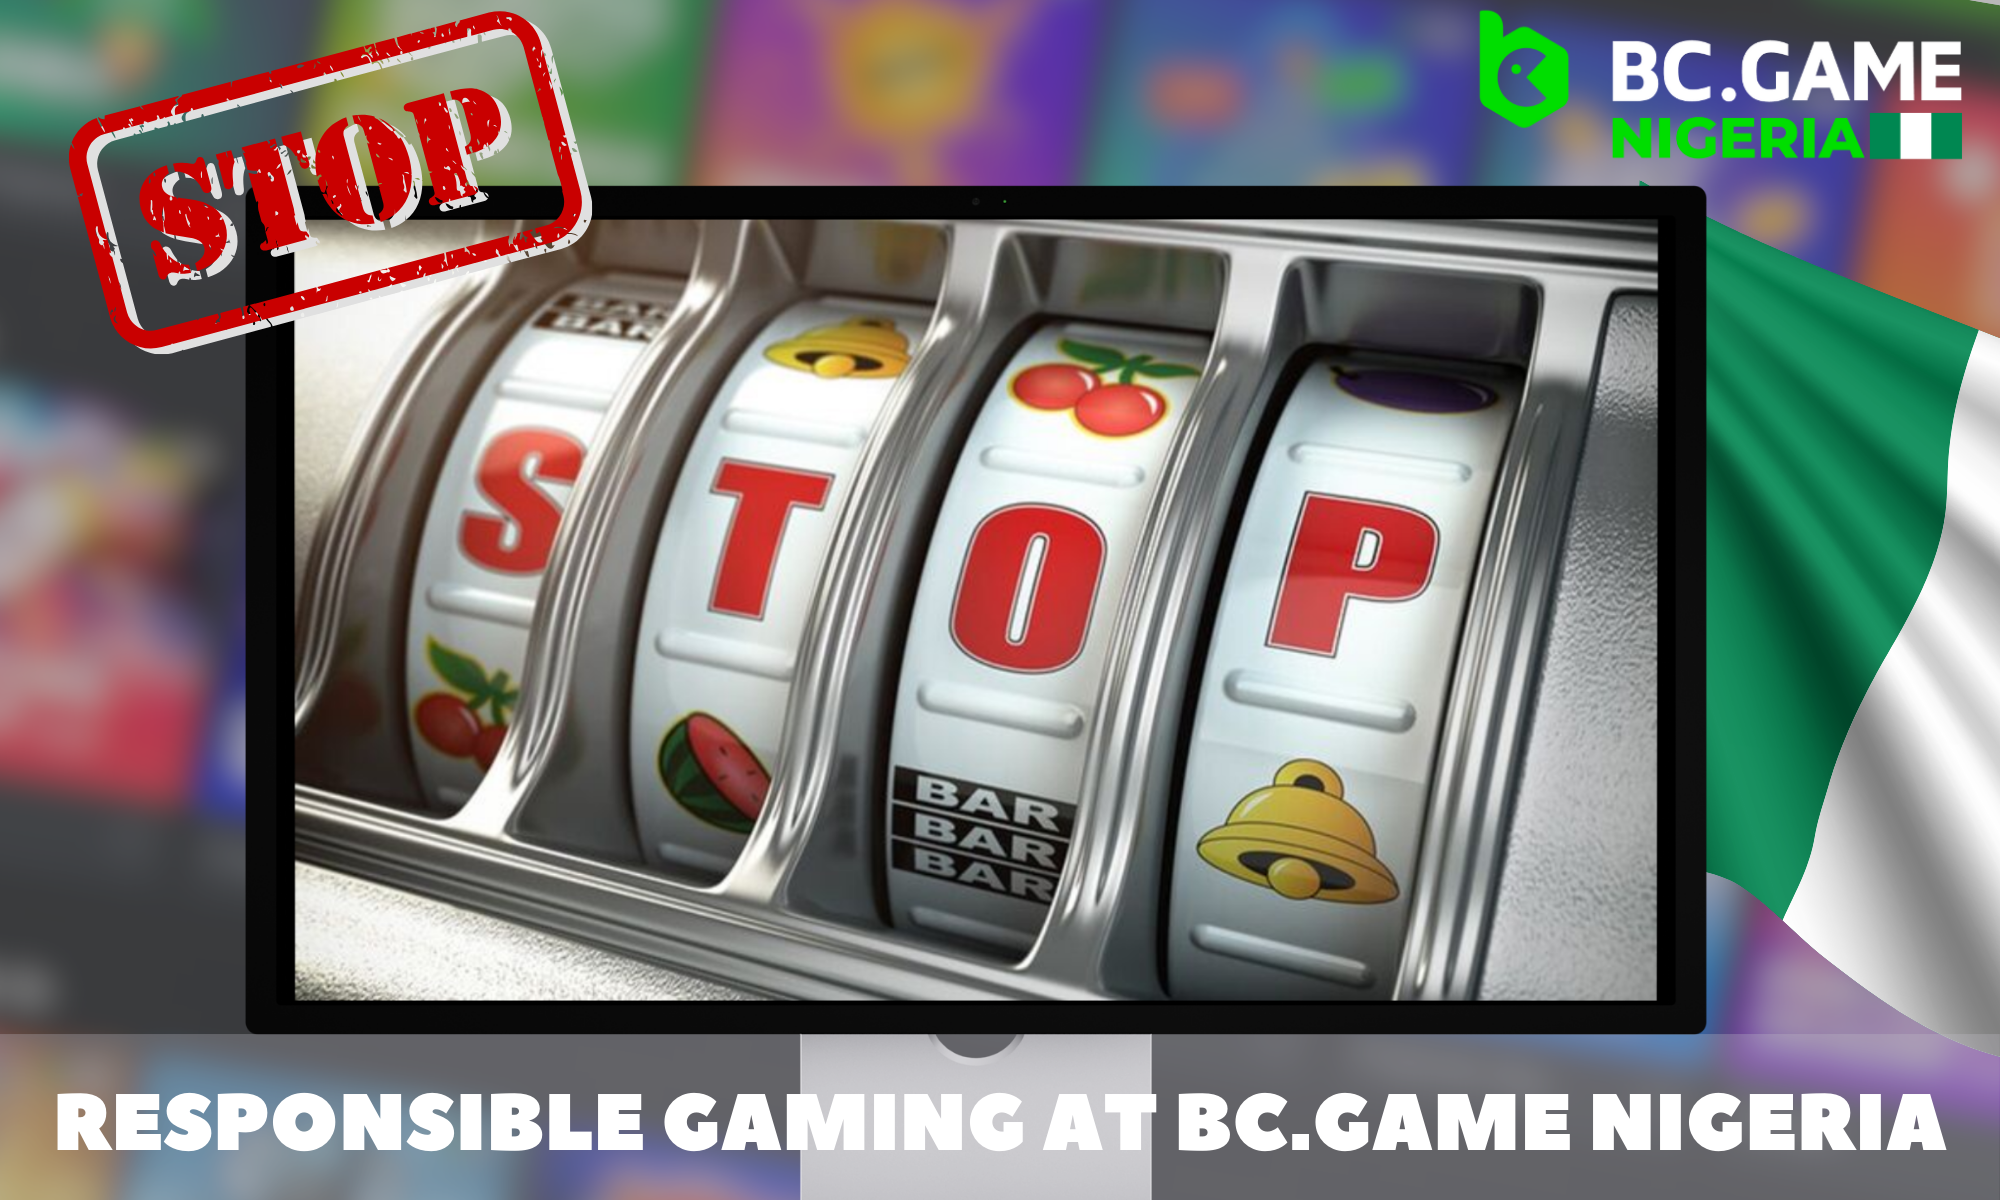 BC.GAME Nigeria is actively fighting gambling addiction